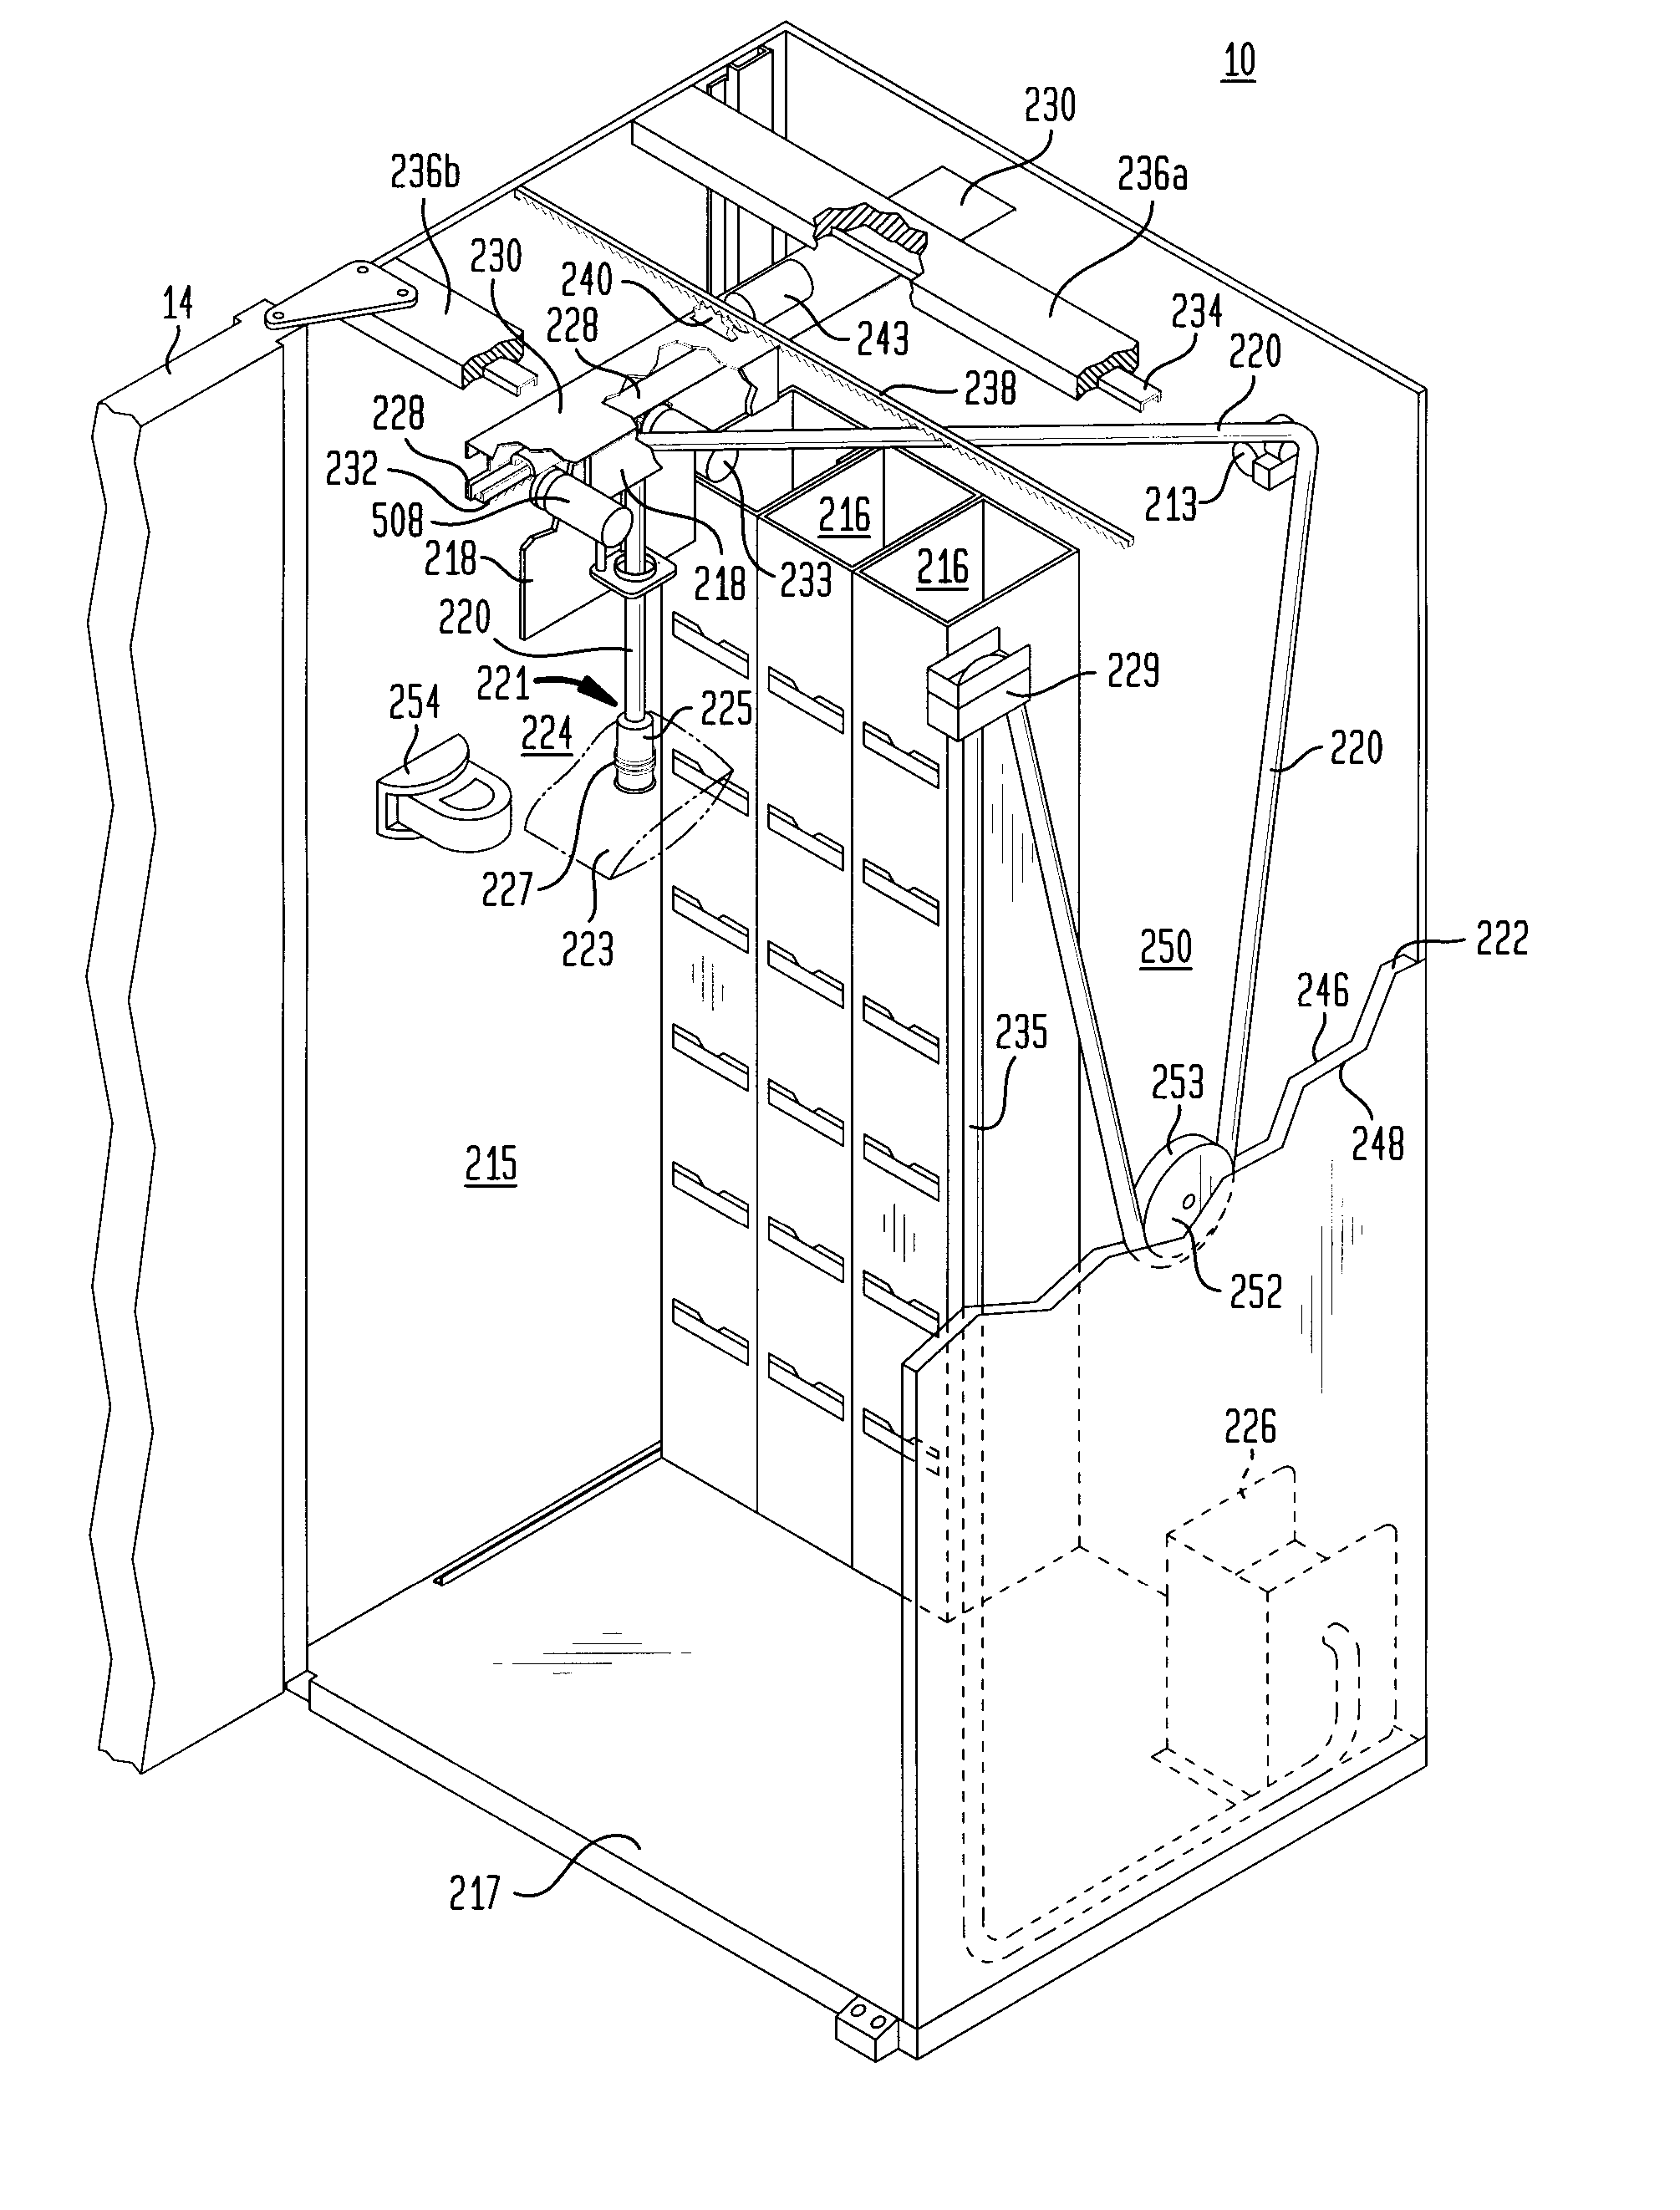 Method and Apparatus for Article Contact Detection